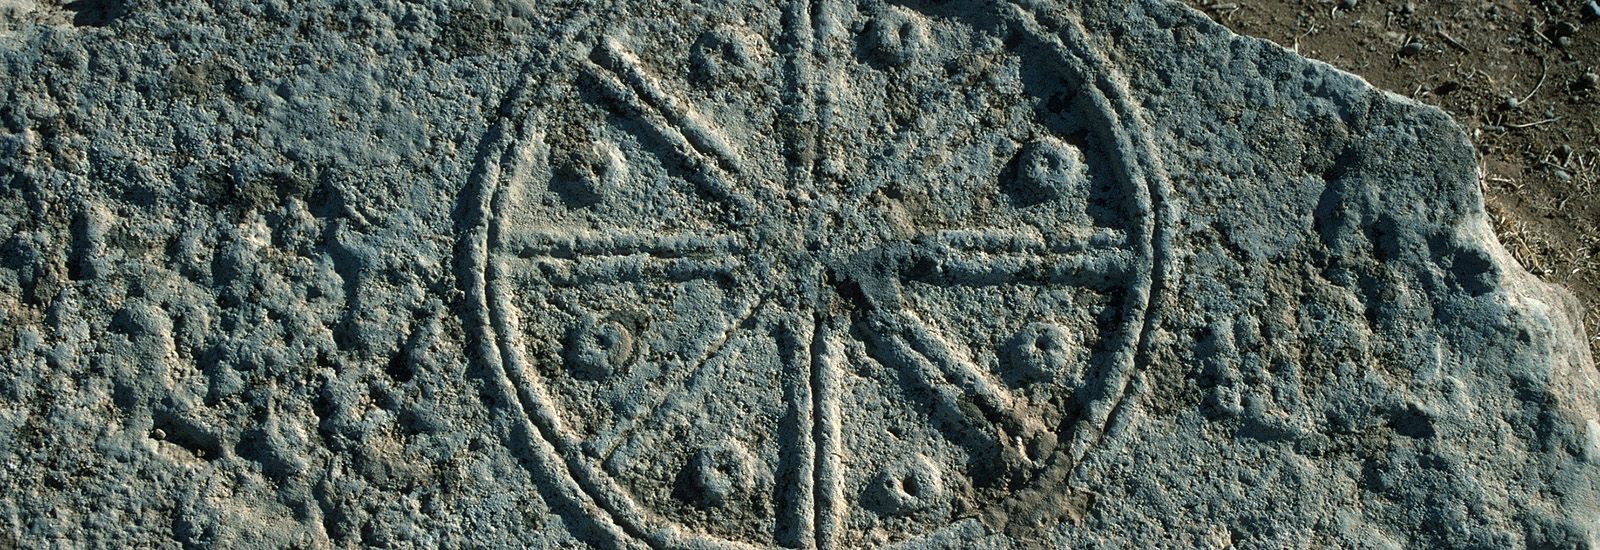 Carving of a Byzantine wheel in stone